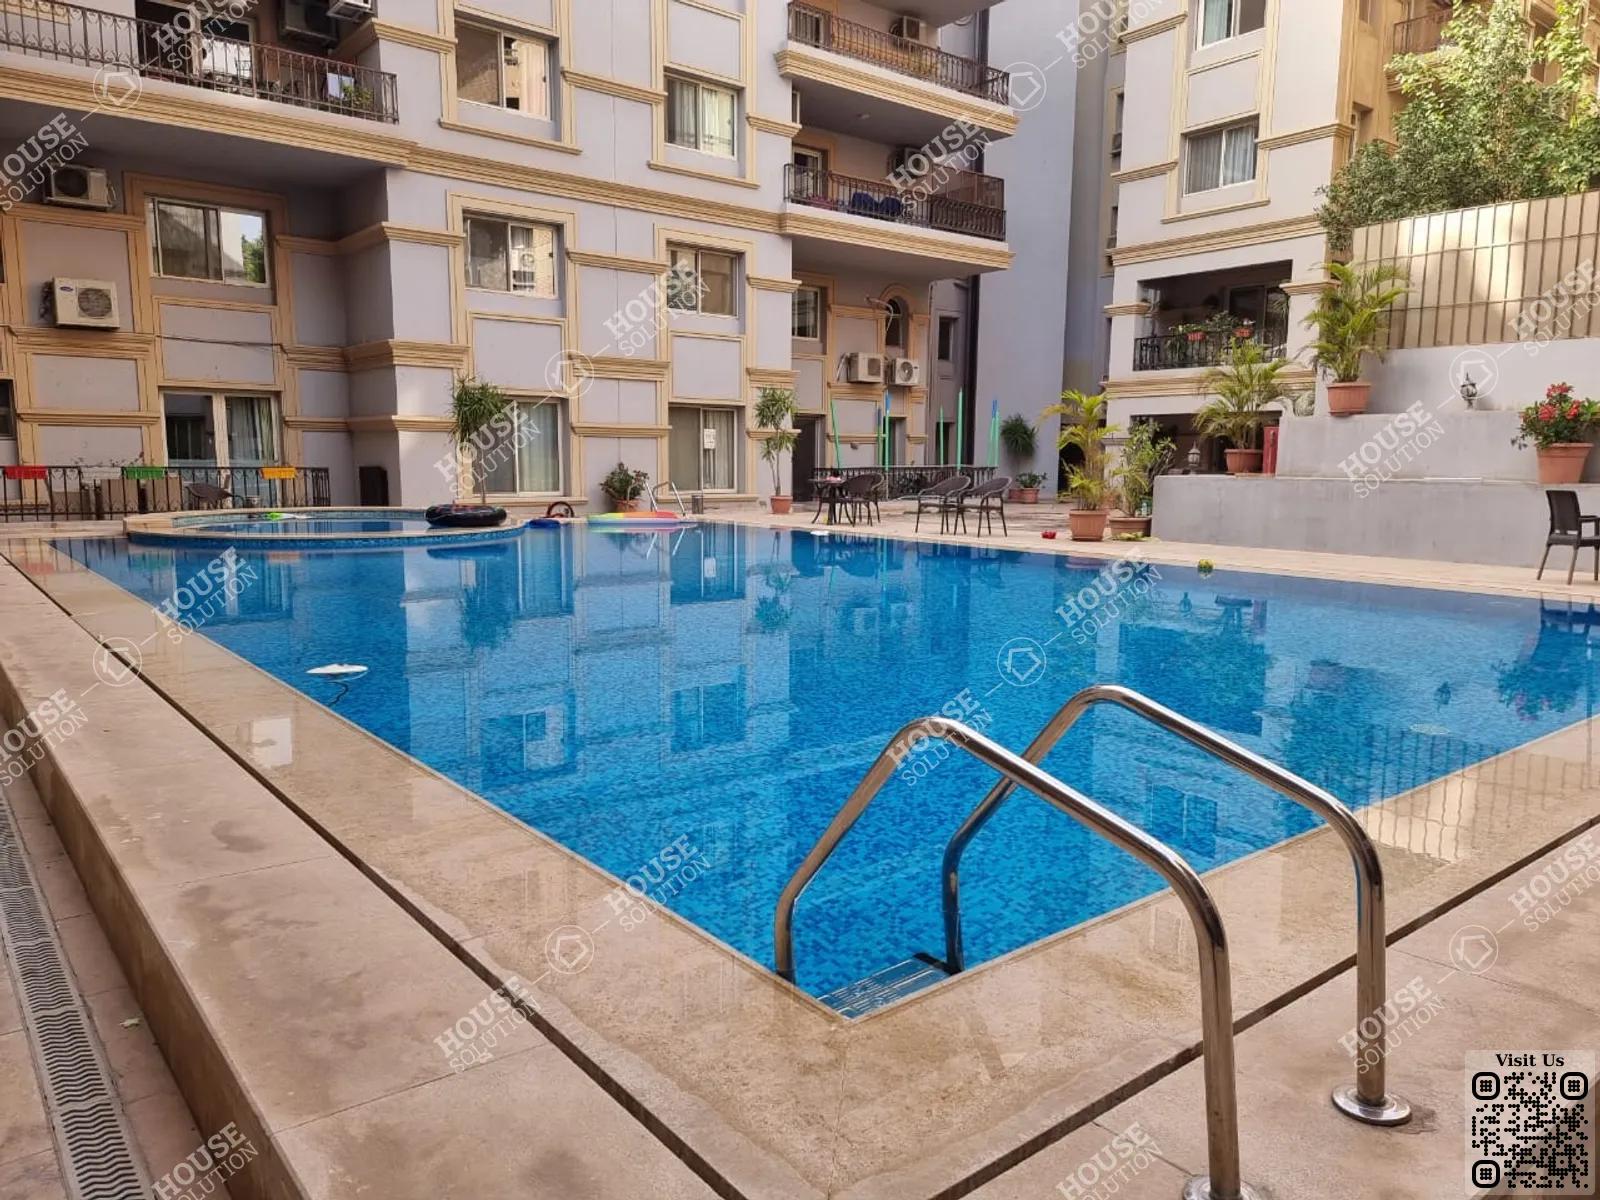 SHARED SWIMMING POOL  @ Apartments For Rent In Maadi Maadi Sarayat Area: 320 m² consists of 4 Bedrooms 3 Bathrooms Modern furnished 5 stars #5459-1